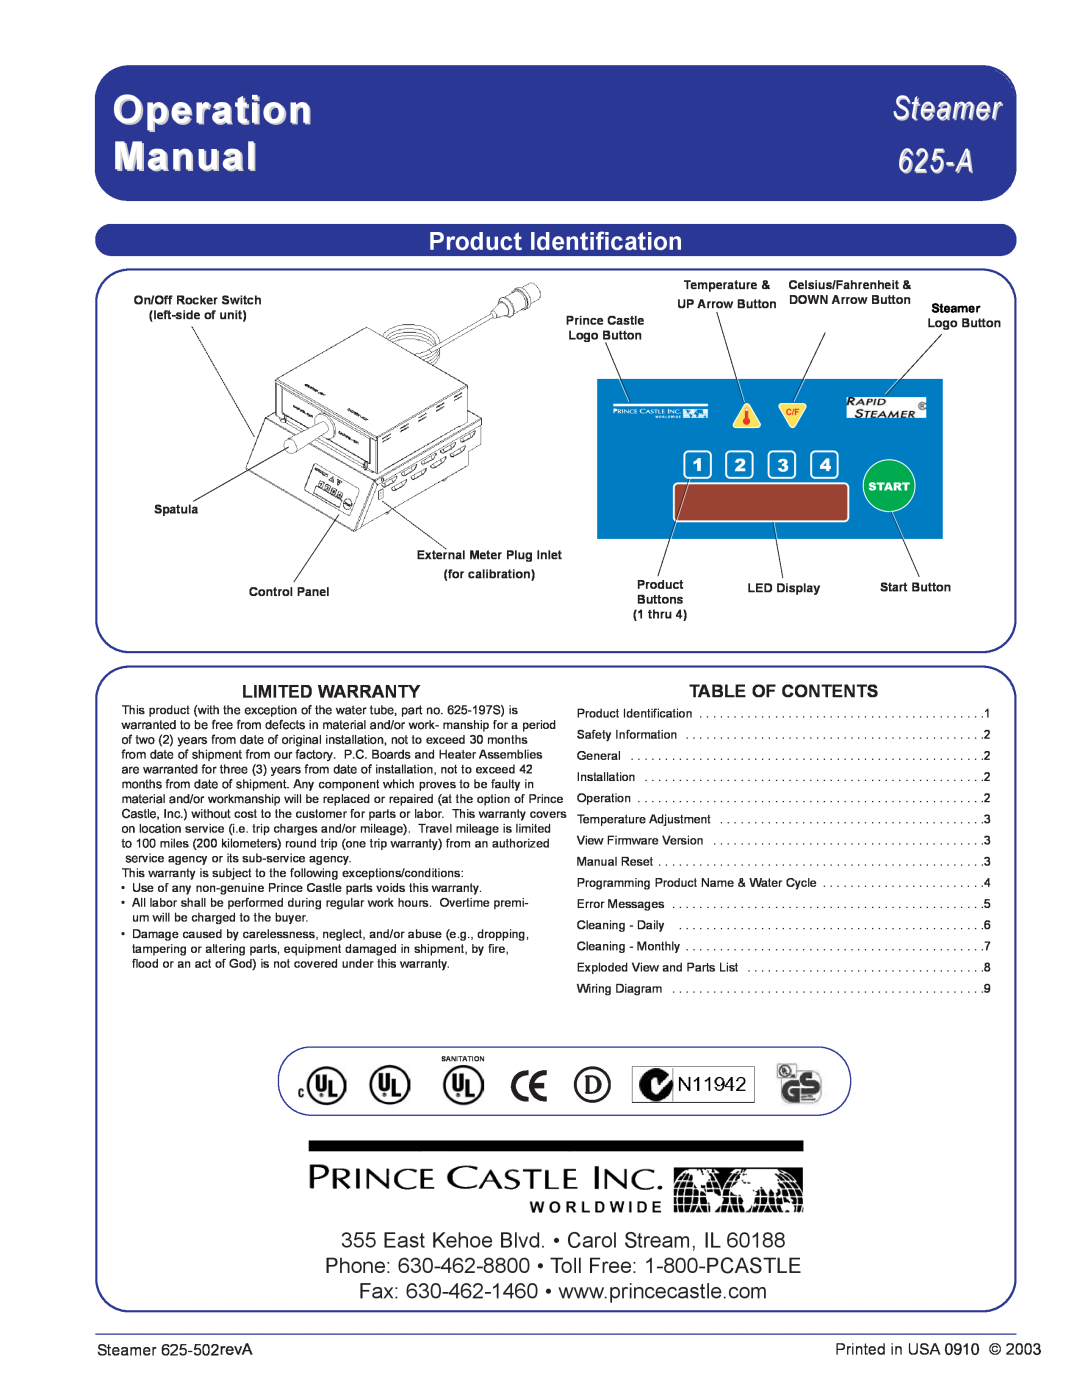 Prince Castle 625-A625-A operation manual Product Identification, Steamer 625-A, Limited Warranty, Table Of Contents 